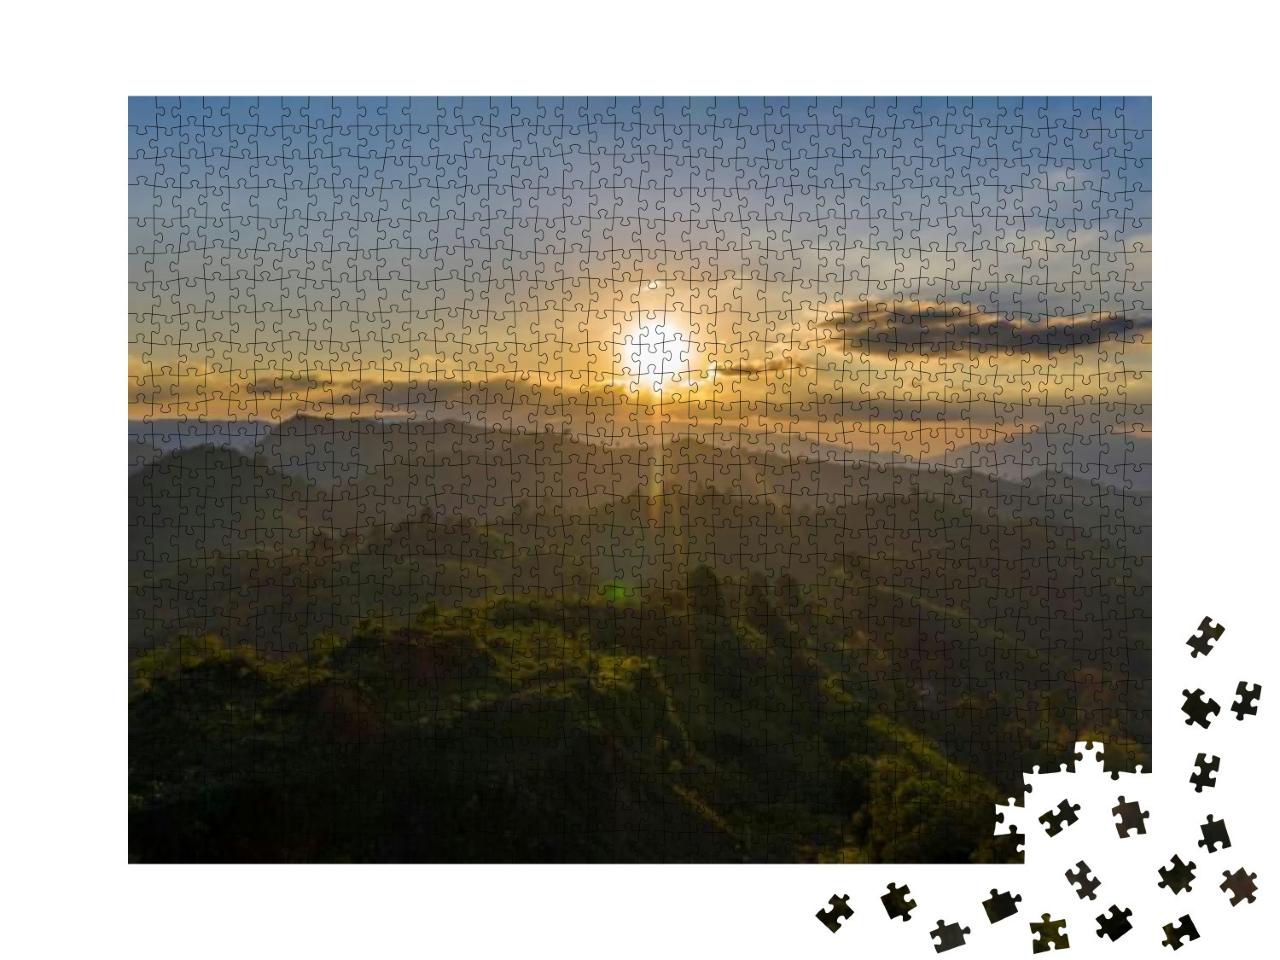 Sunset in Mountains... Jigsaw Puzzle with 1000 pieces